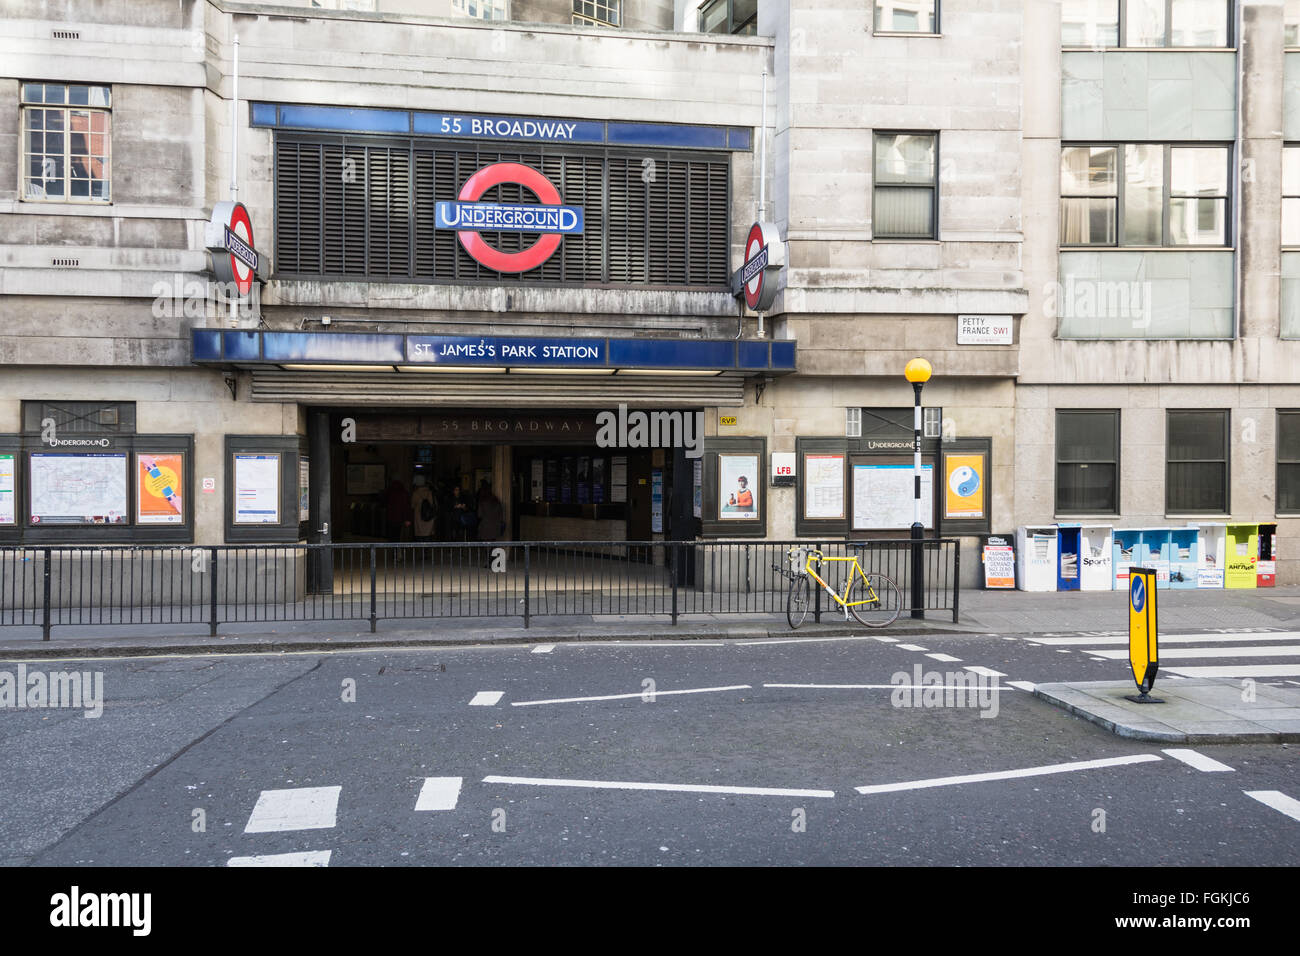 St Jame's Park Station in Petty Francia, London, Westminster SW1 Foto Stock